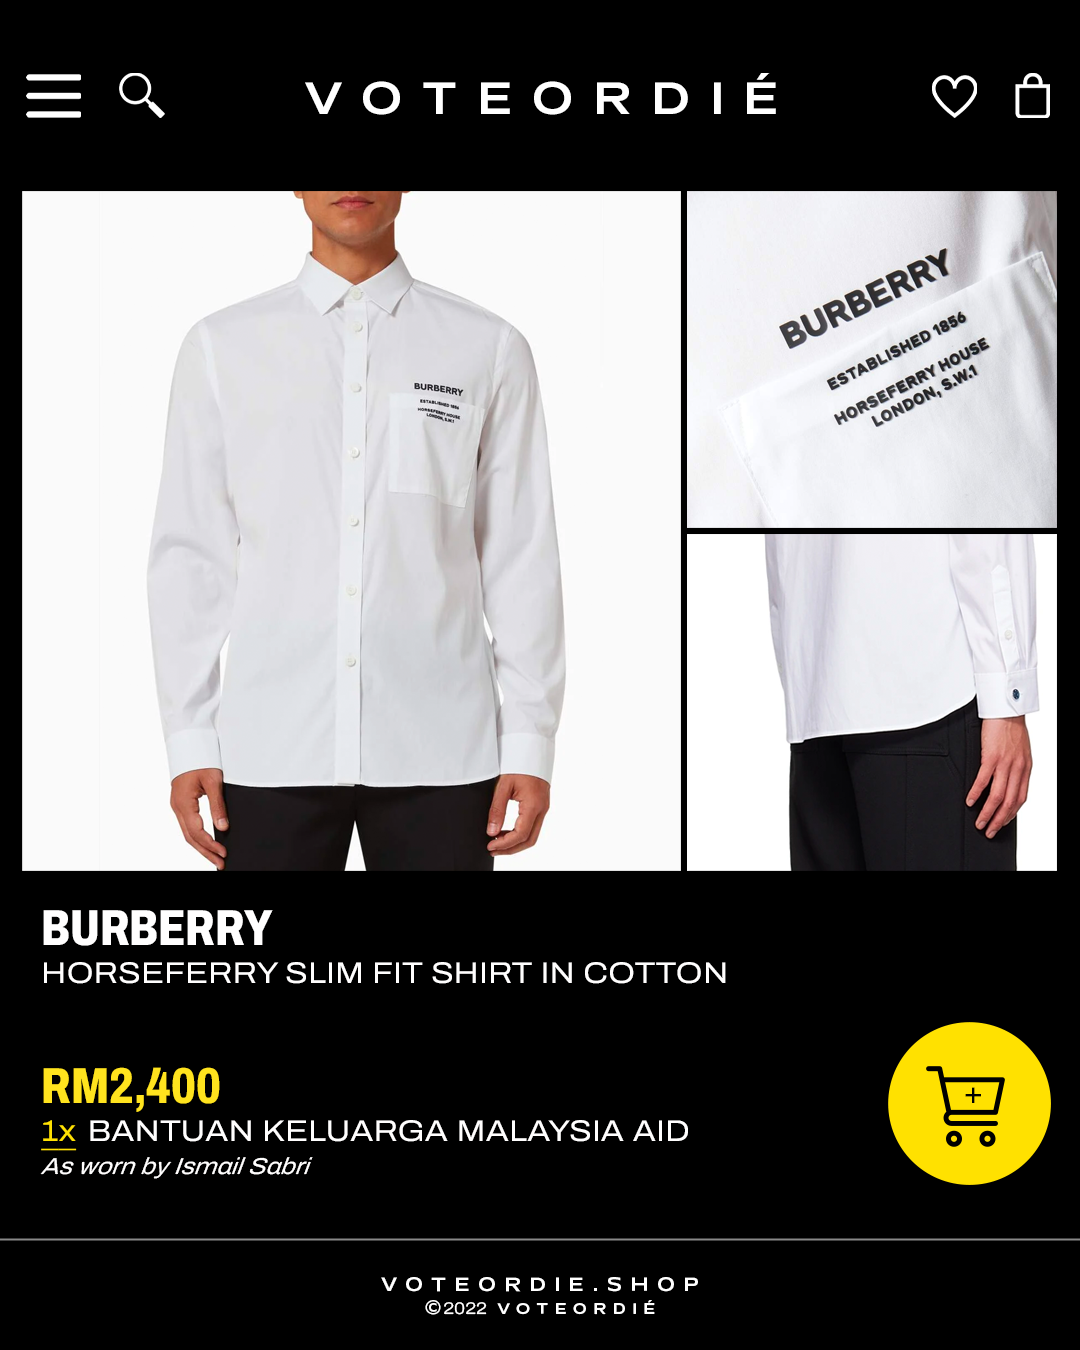 A Burberry shirt, as allegedly seen on caretaker Prime Minister Ismail Sabri, via Voteordié. Image credit: Provided to WauPost